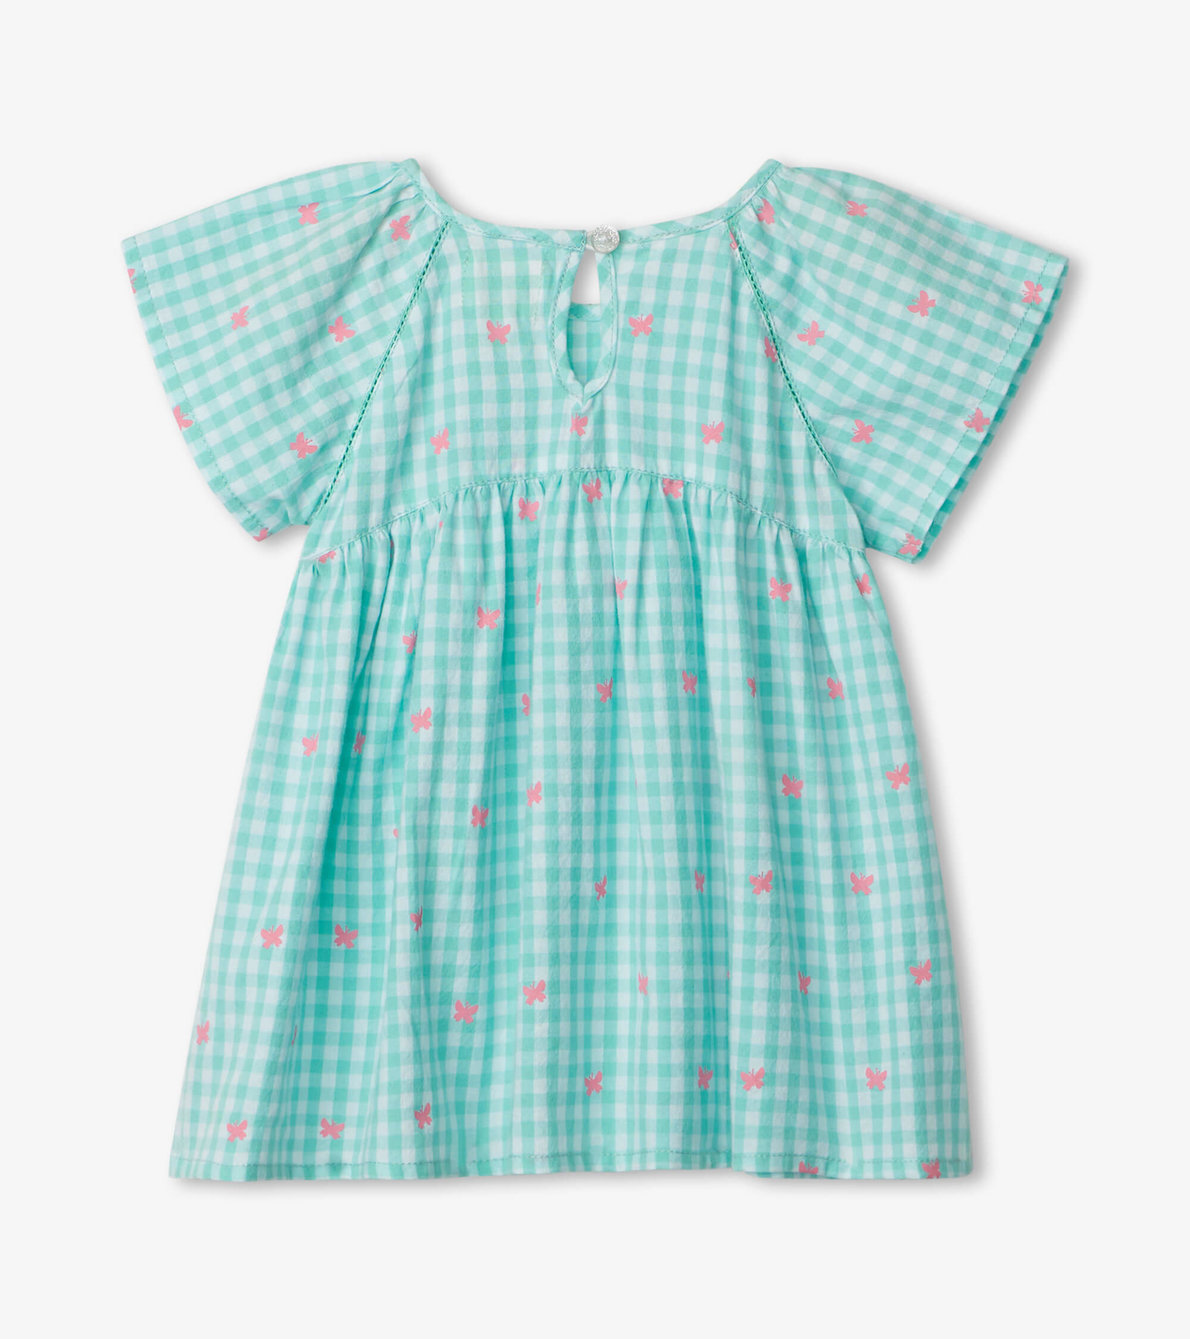 View larger image of Butterfly Gingham Baby Woven Dress